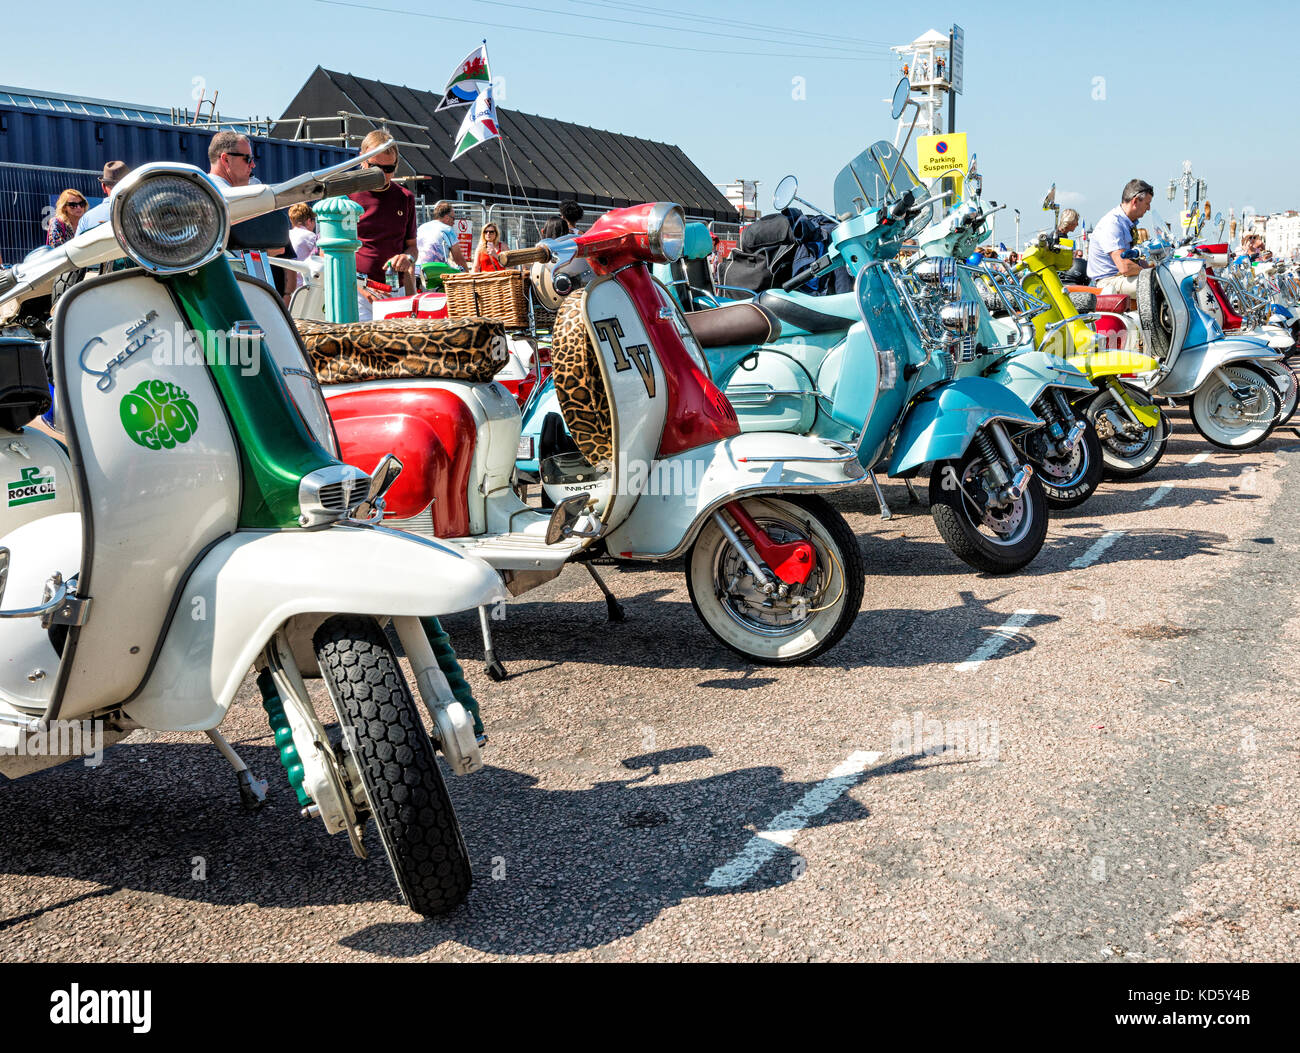 Brighton Mod Rally, August Bank Holiday Scooters lined up on show Stock Photo